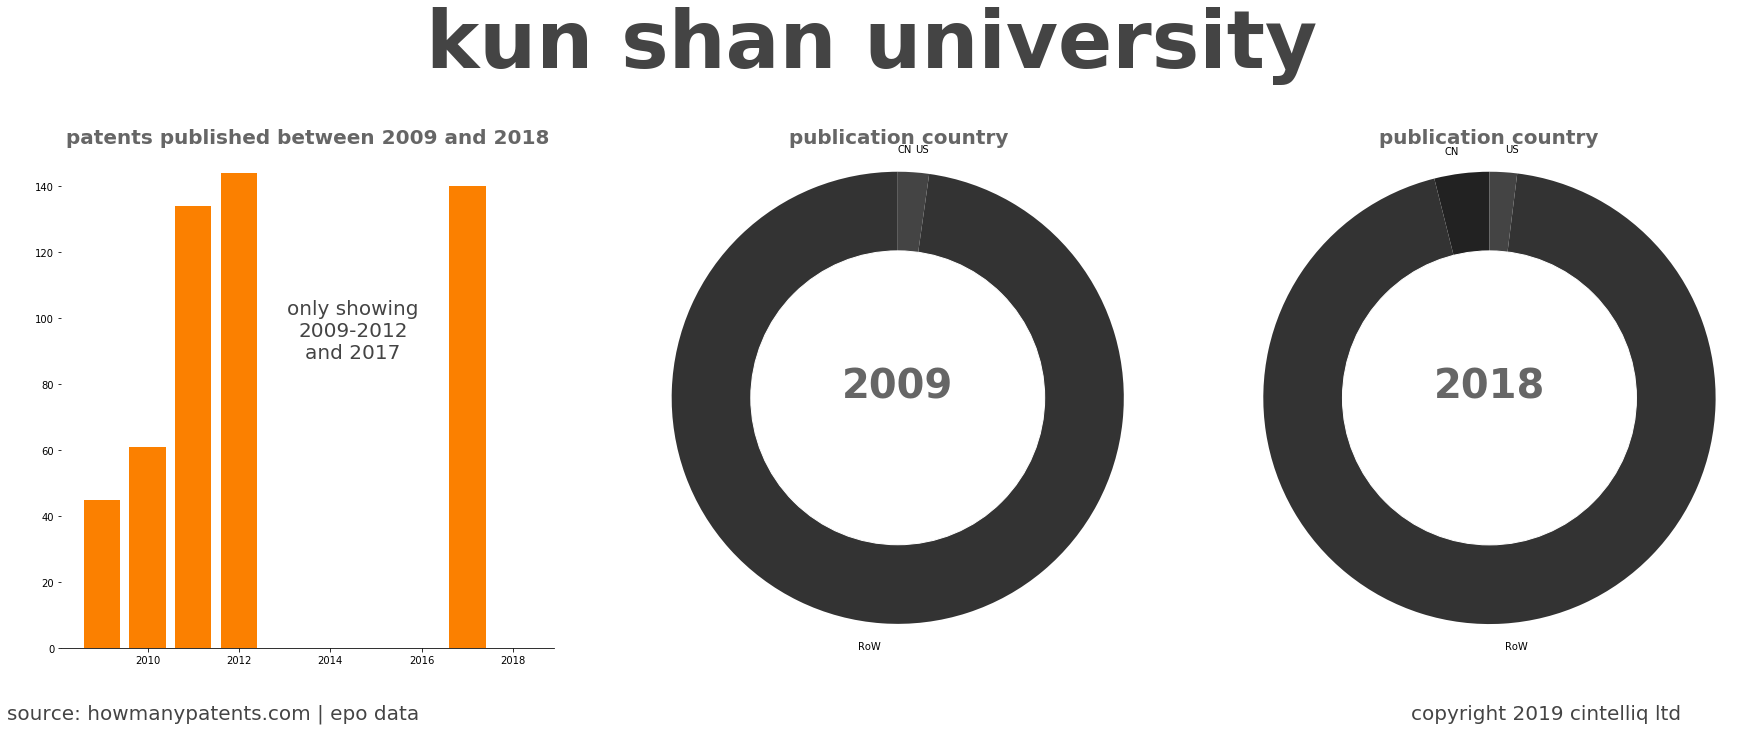 summary of patents for Kun Shan University